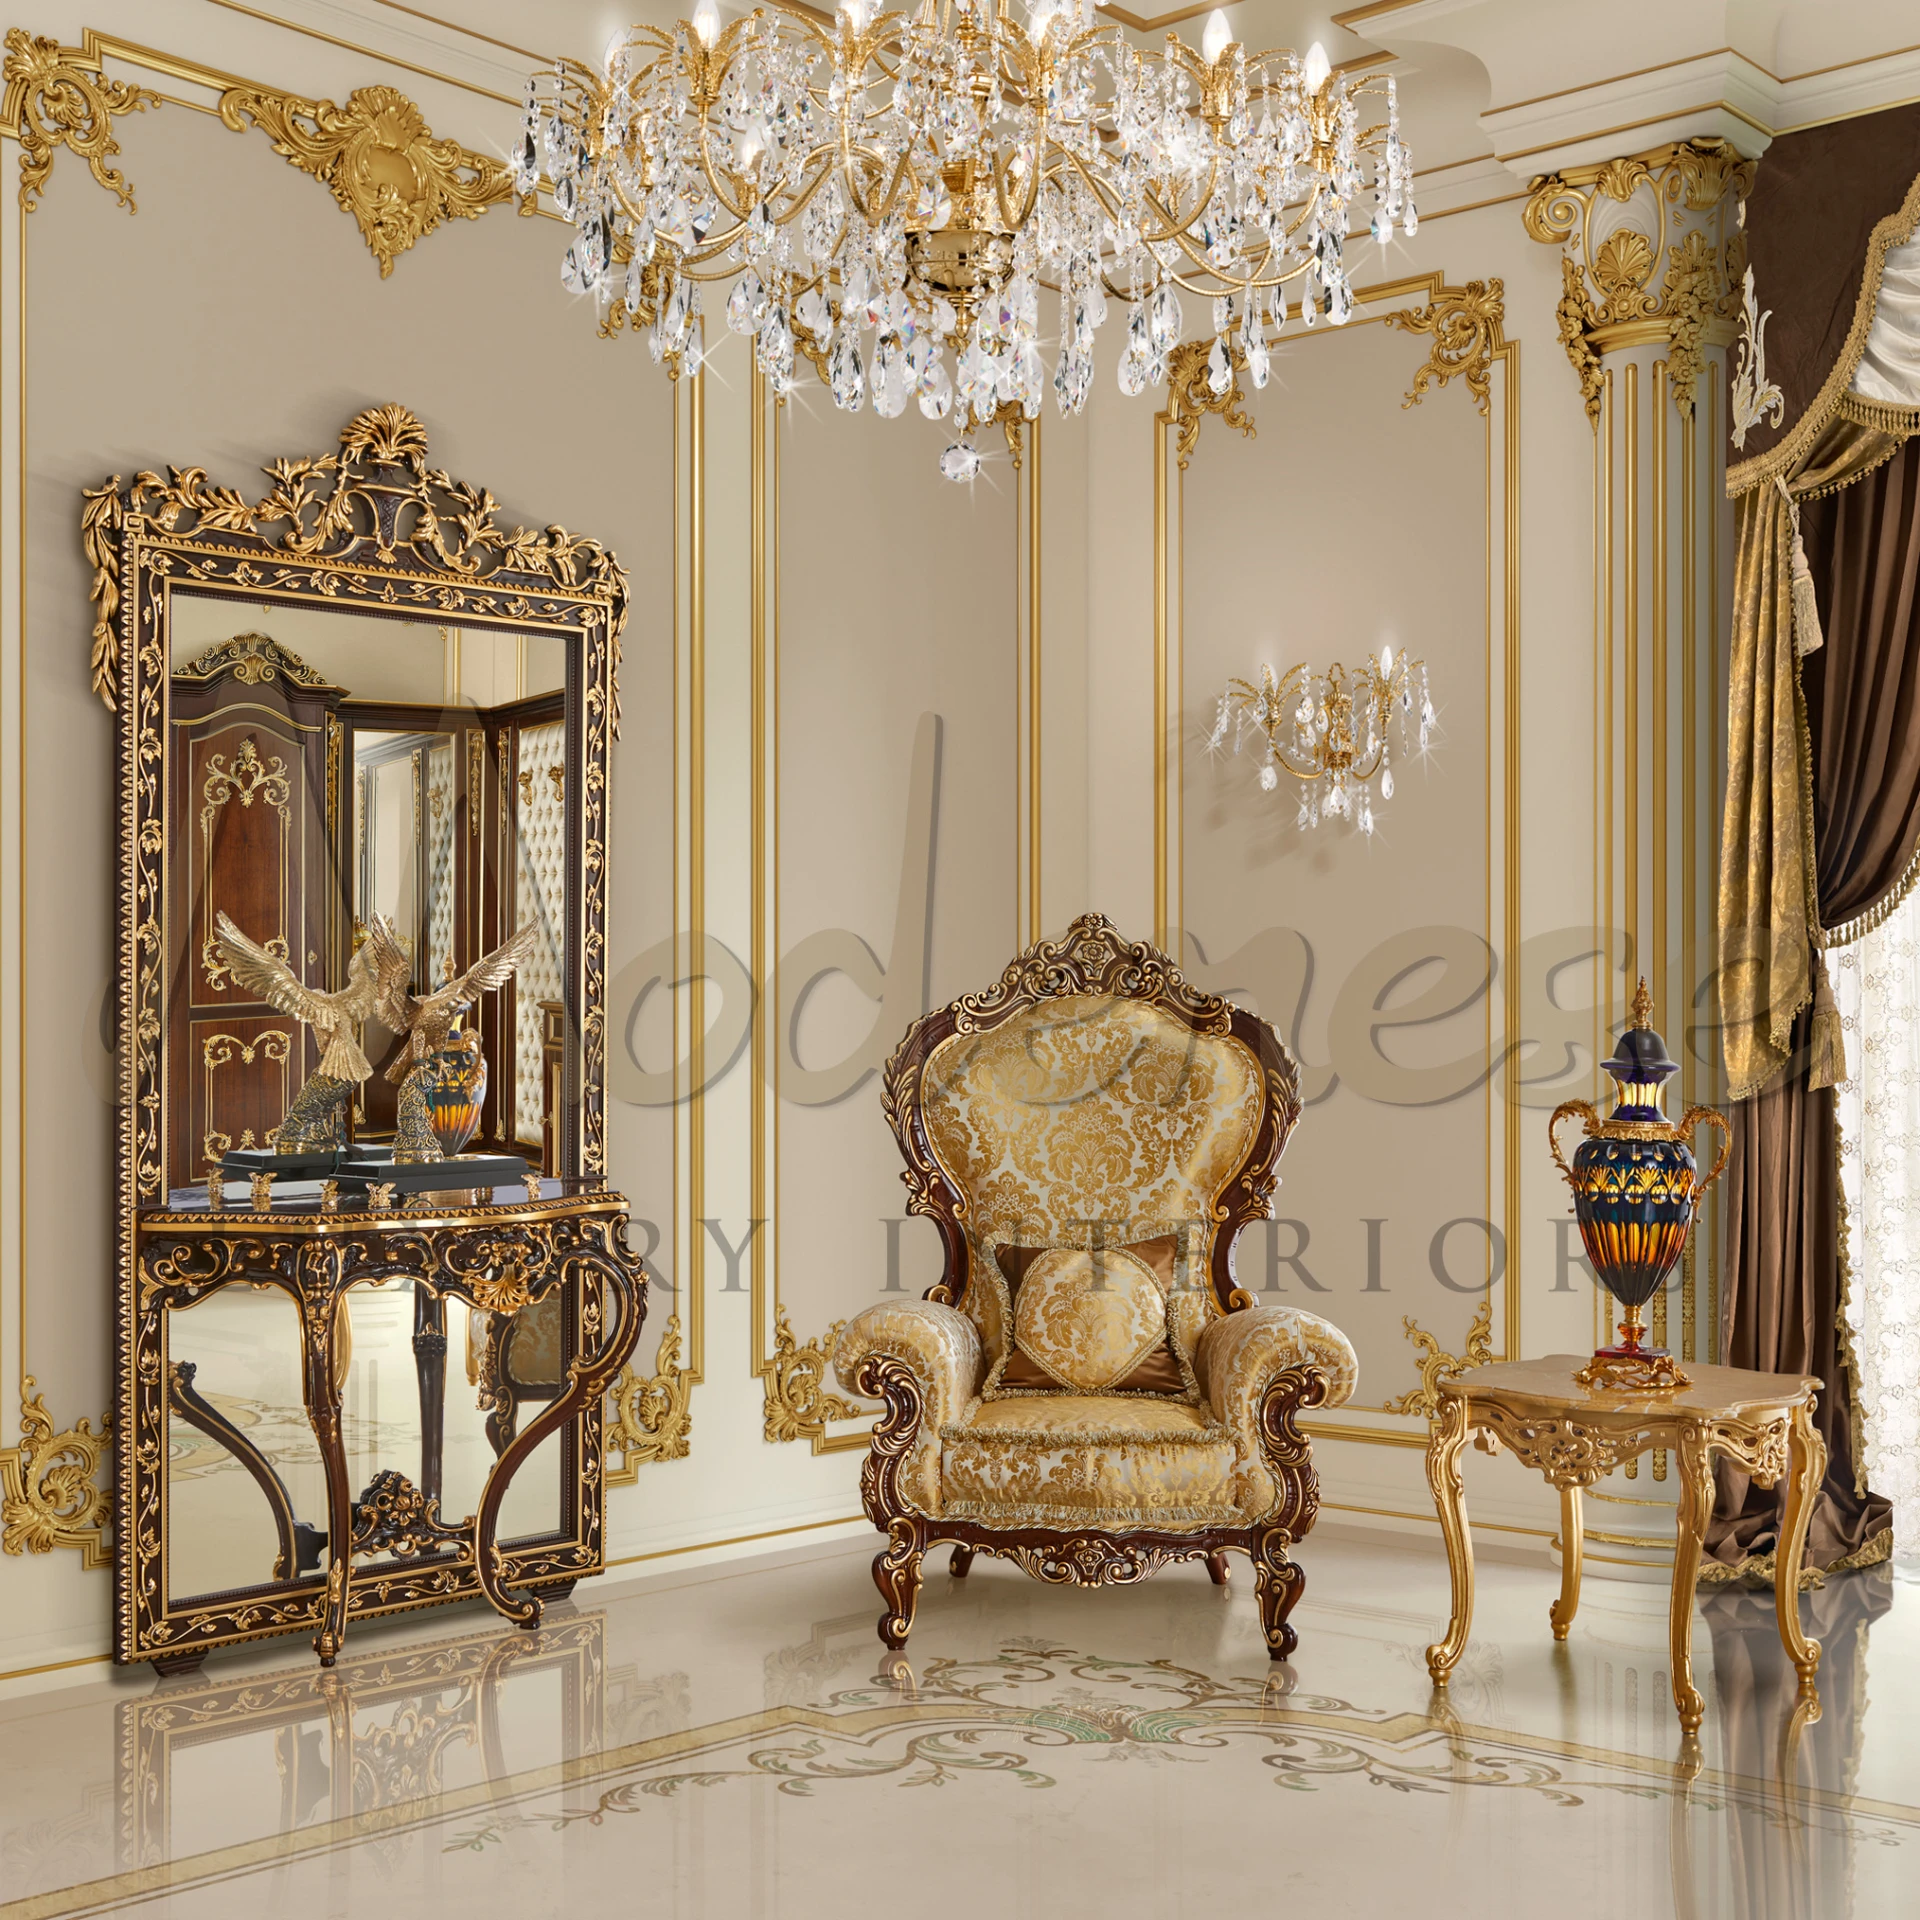 Exquisite Empire Console with customizable top, embodying classical collection and baroque design in golden carvings.